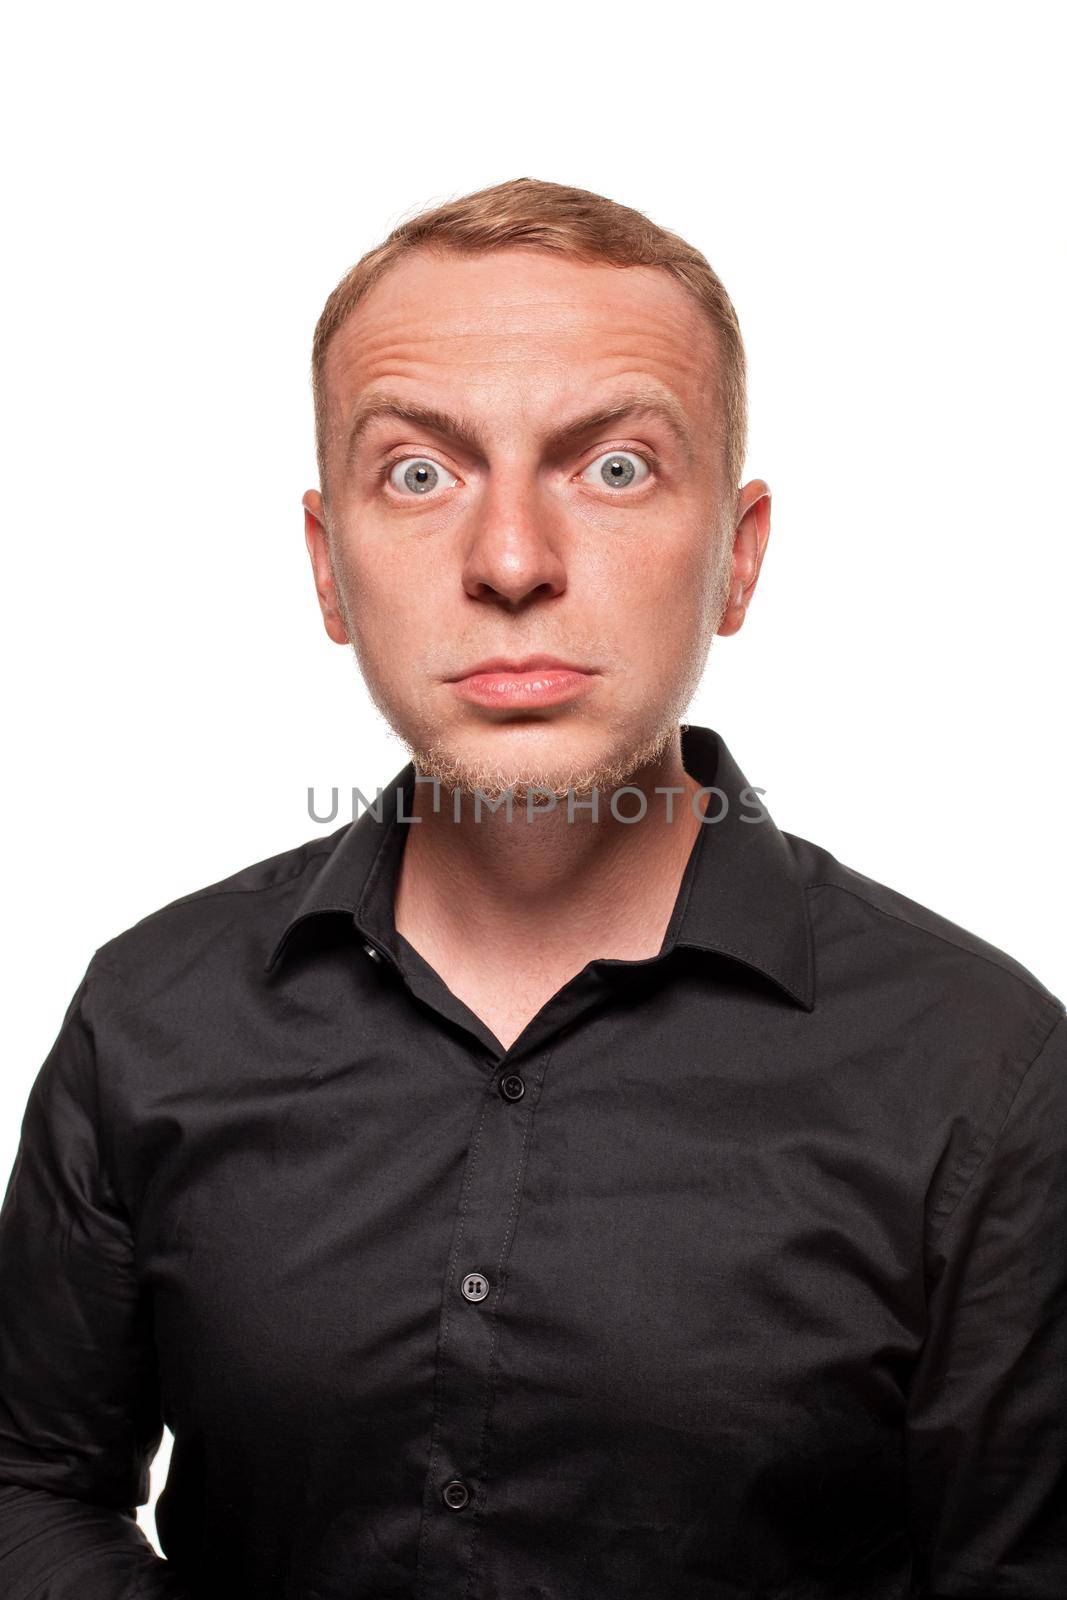 Handsome young blond man in a black shirt is making faces and staring at the camera, isolated on a white background